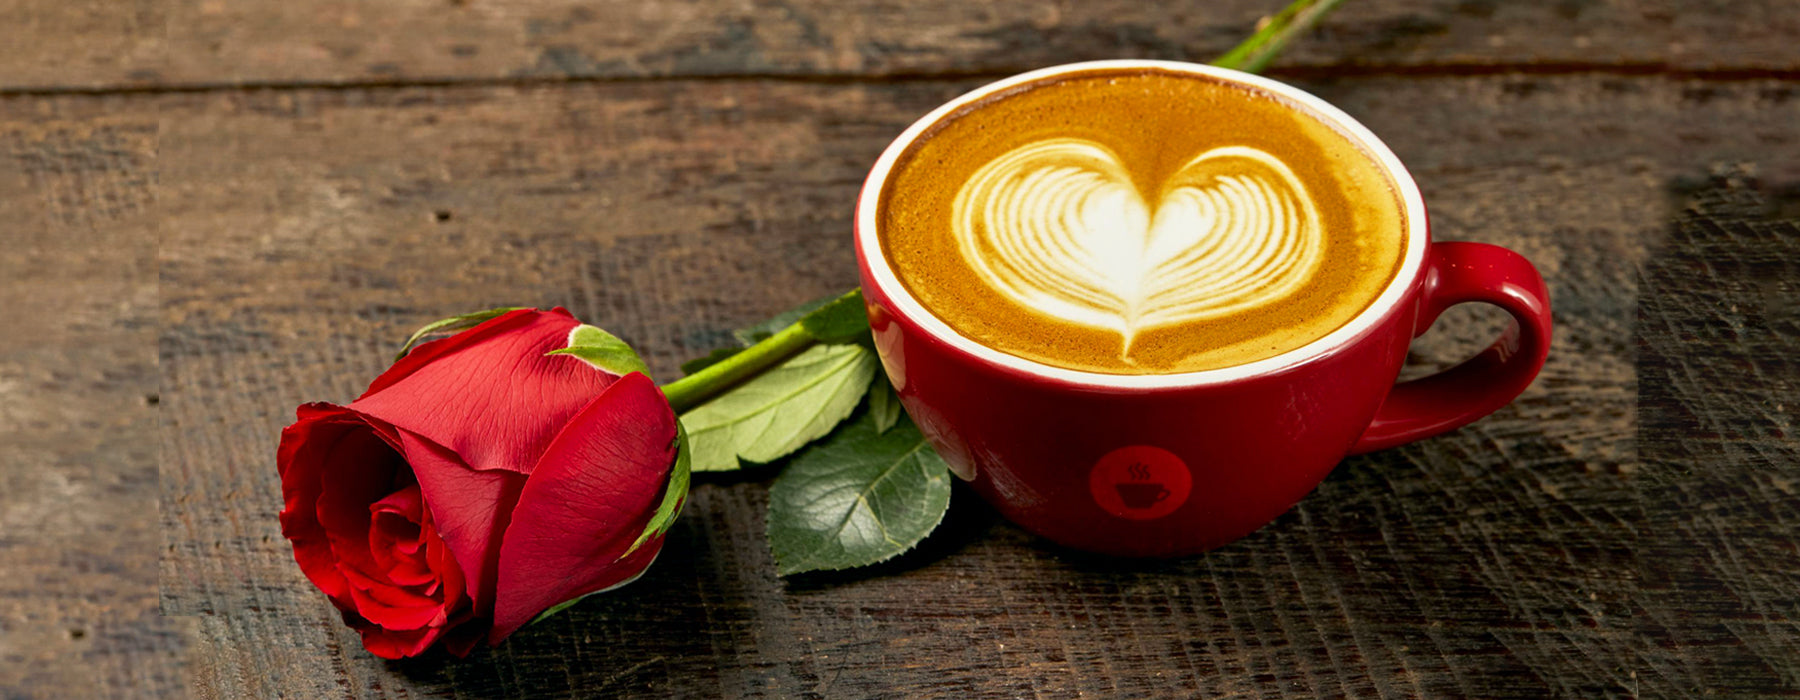 A Valentine's Gift Guide For Coffee Lovers - EspressoWorks